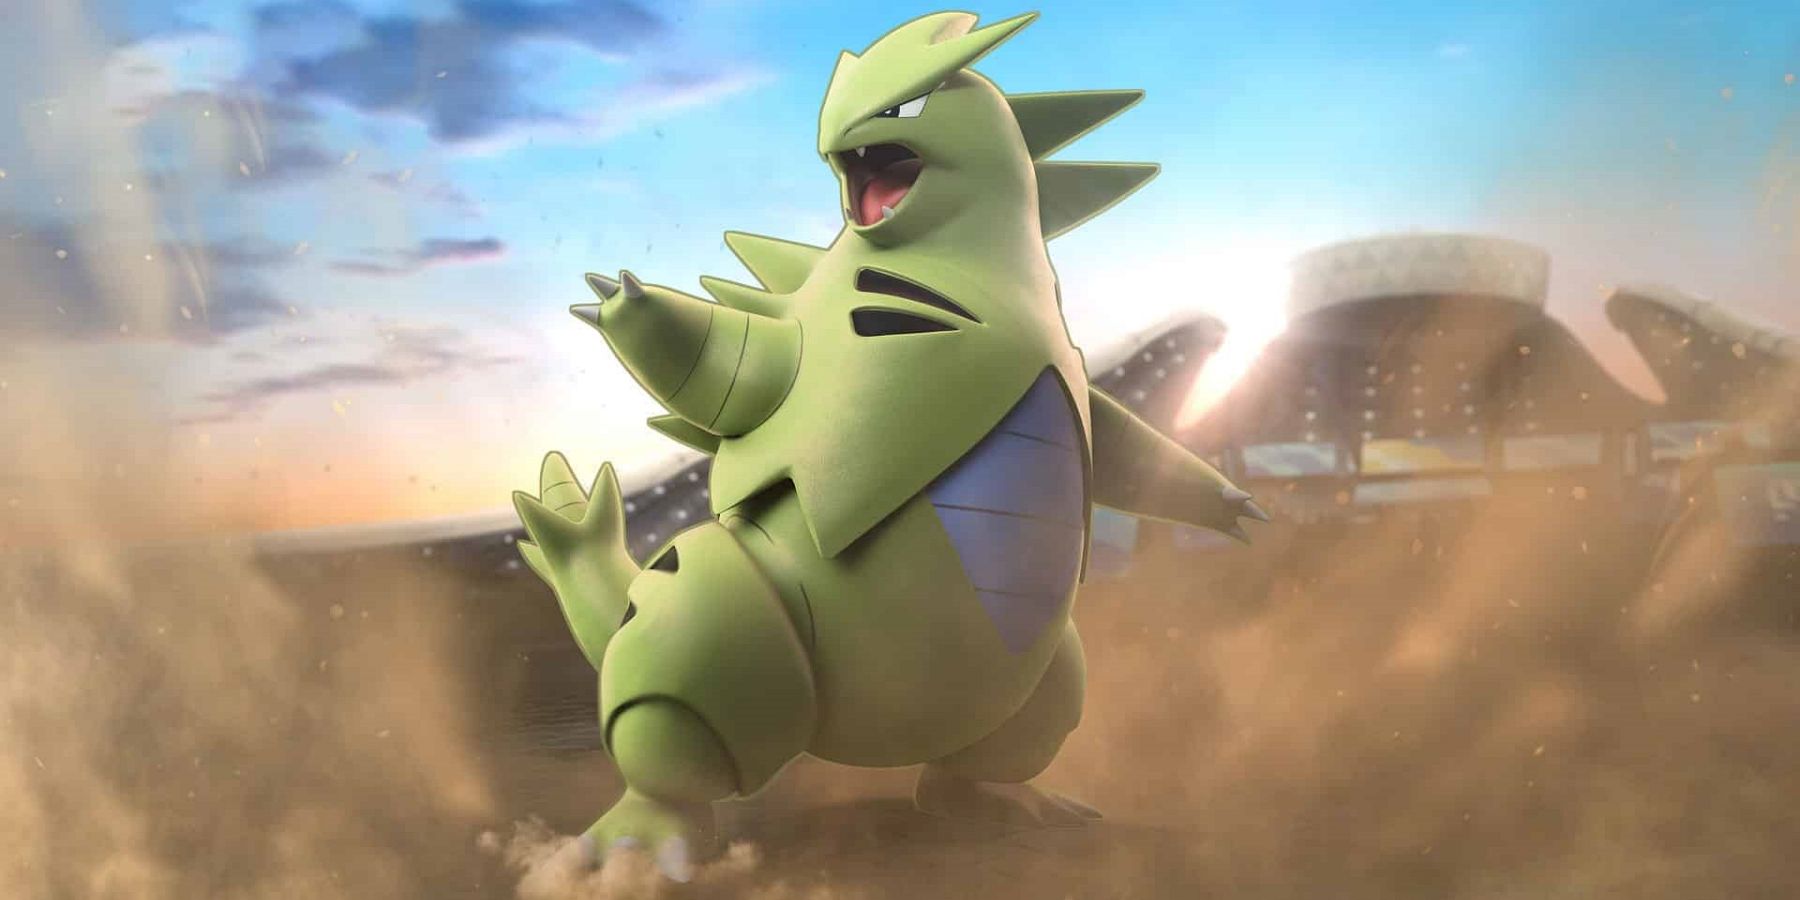 pokemon-go-glitch-shows-tyranitar-defending-a-gym-for-an-absurd-amount-of-time